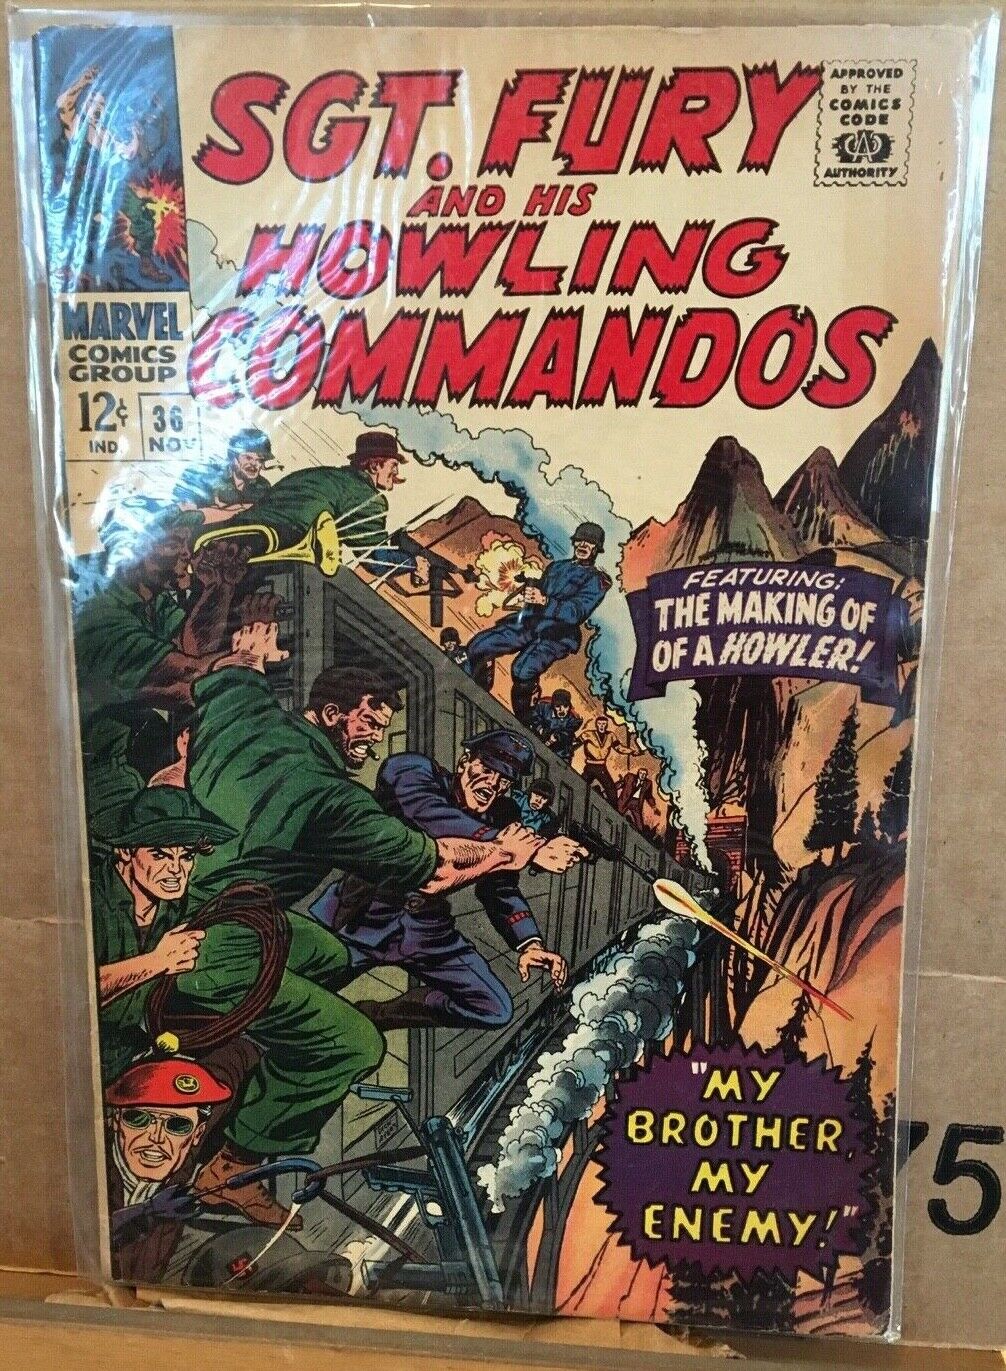 Marvel, Sgt Fury and His Howling Commandos #36, 1966, Stan Lee, VG/FN